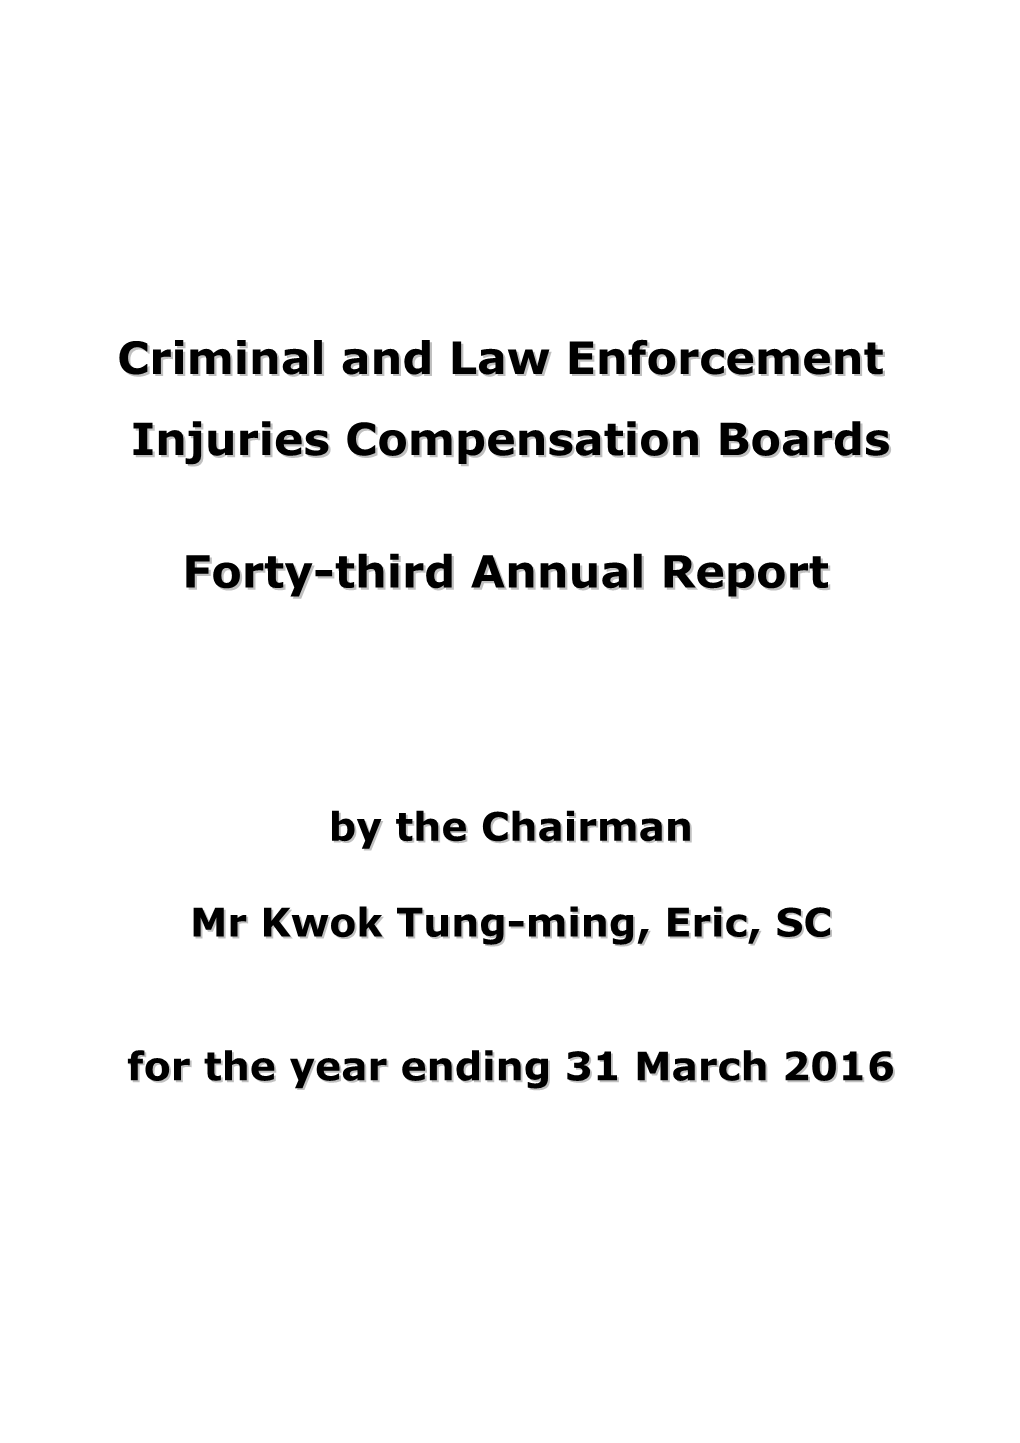 Criminal and Law Enforcement Injuries Compensation Boards